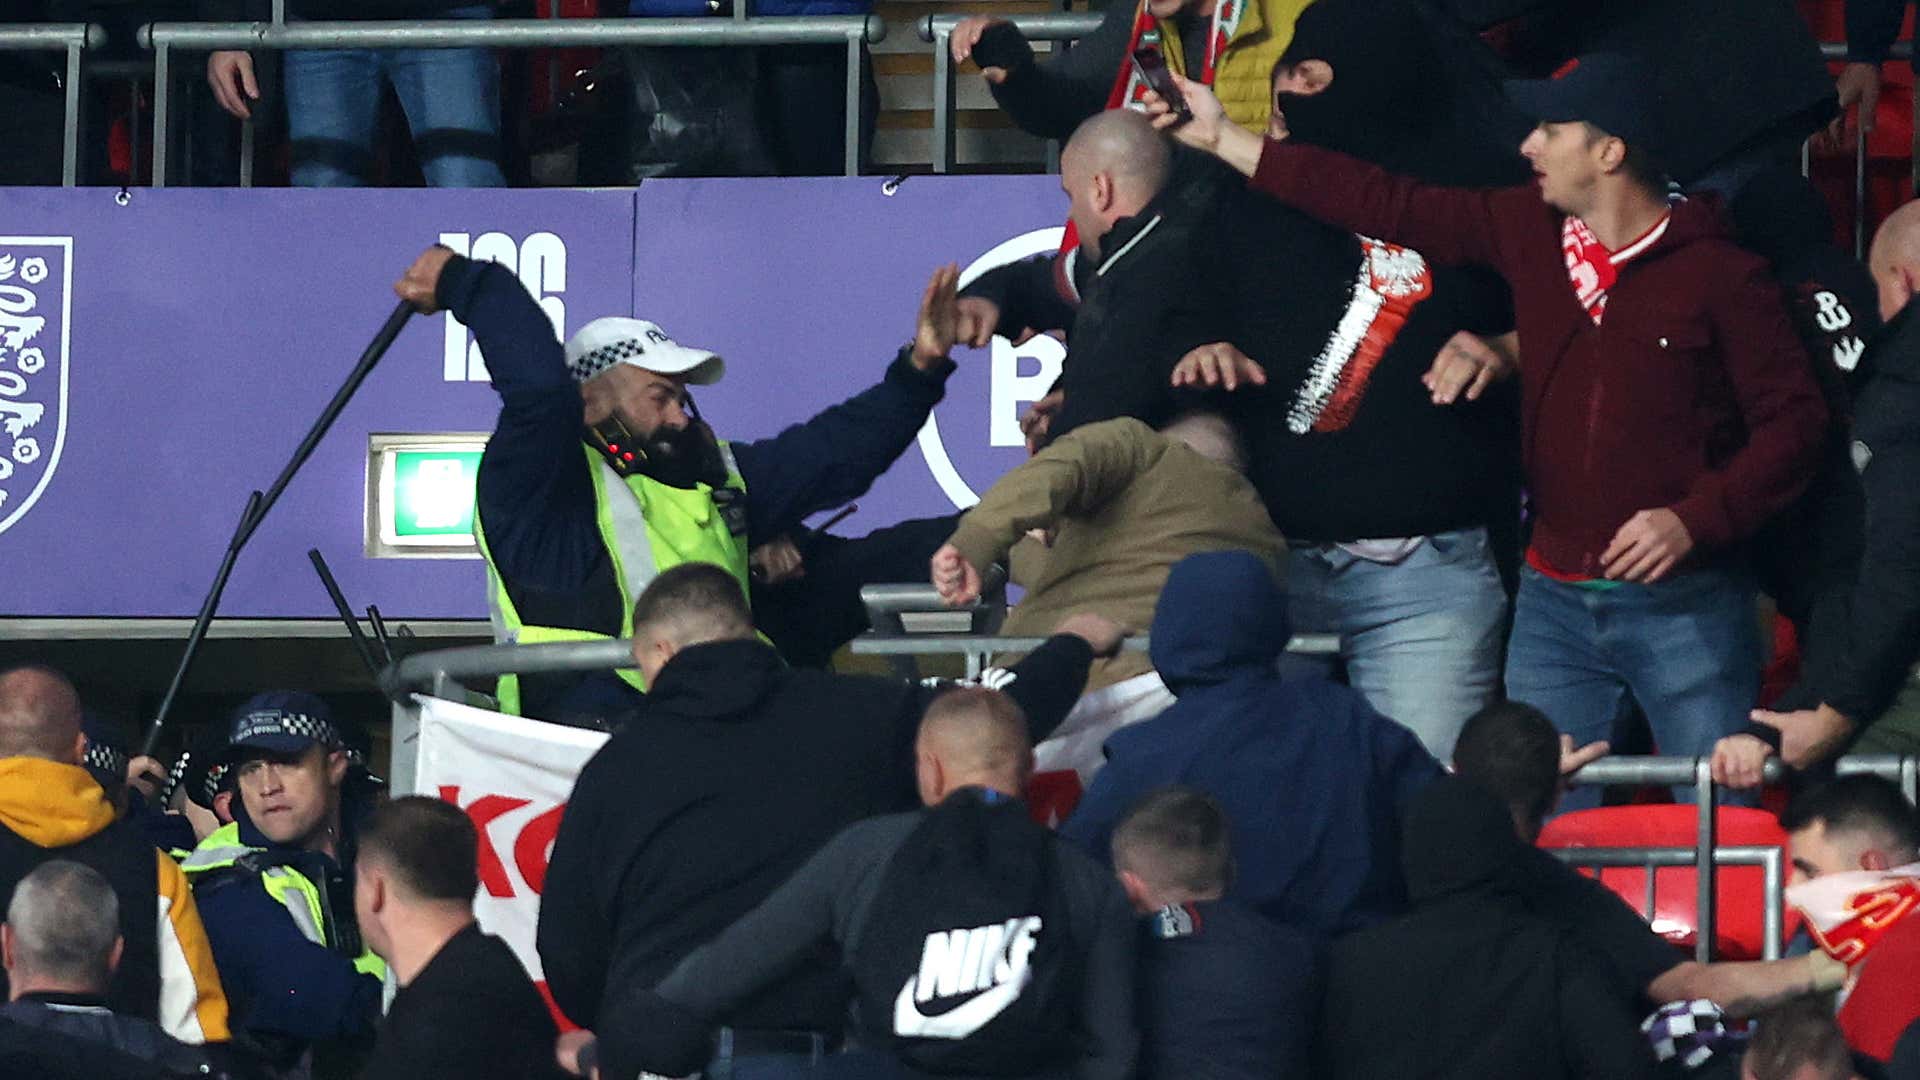 Hungary fans clash with police after 'racially aggravated' offence during England match